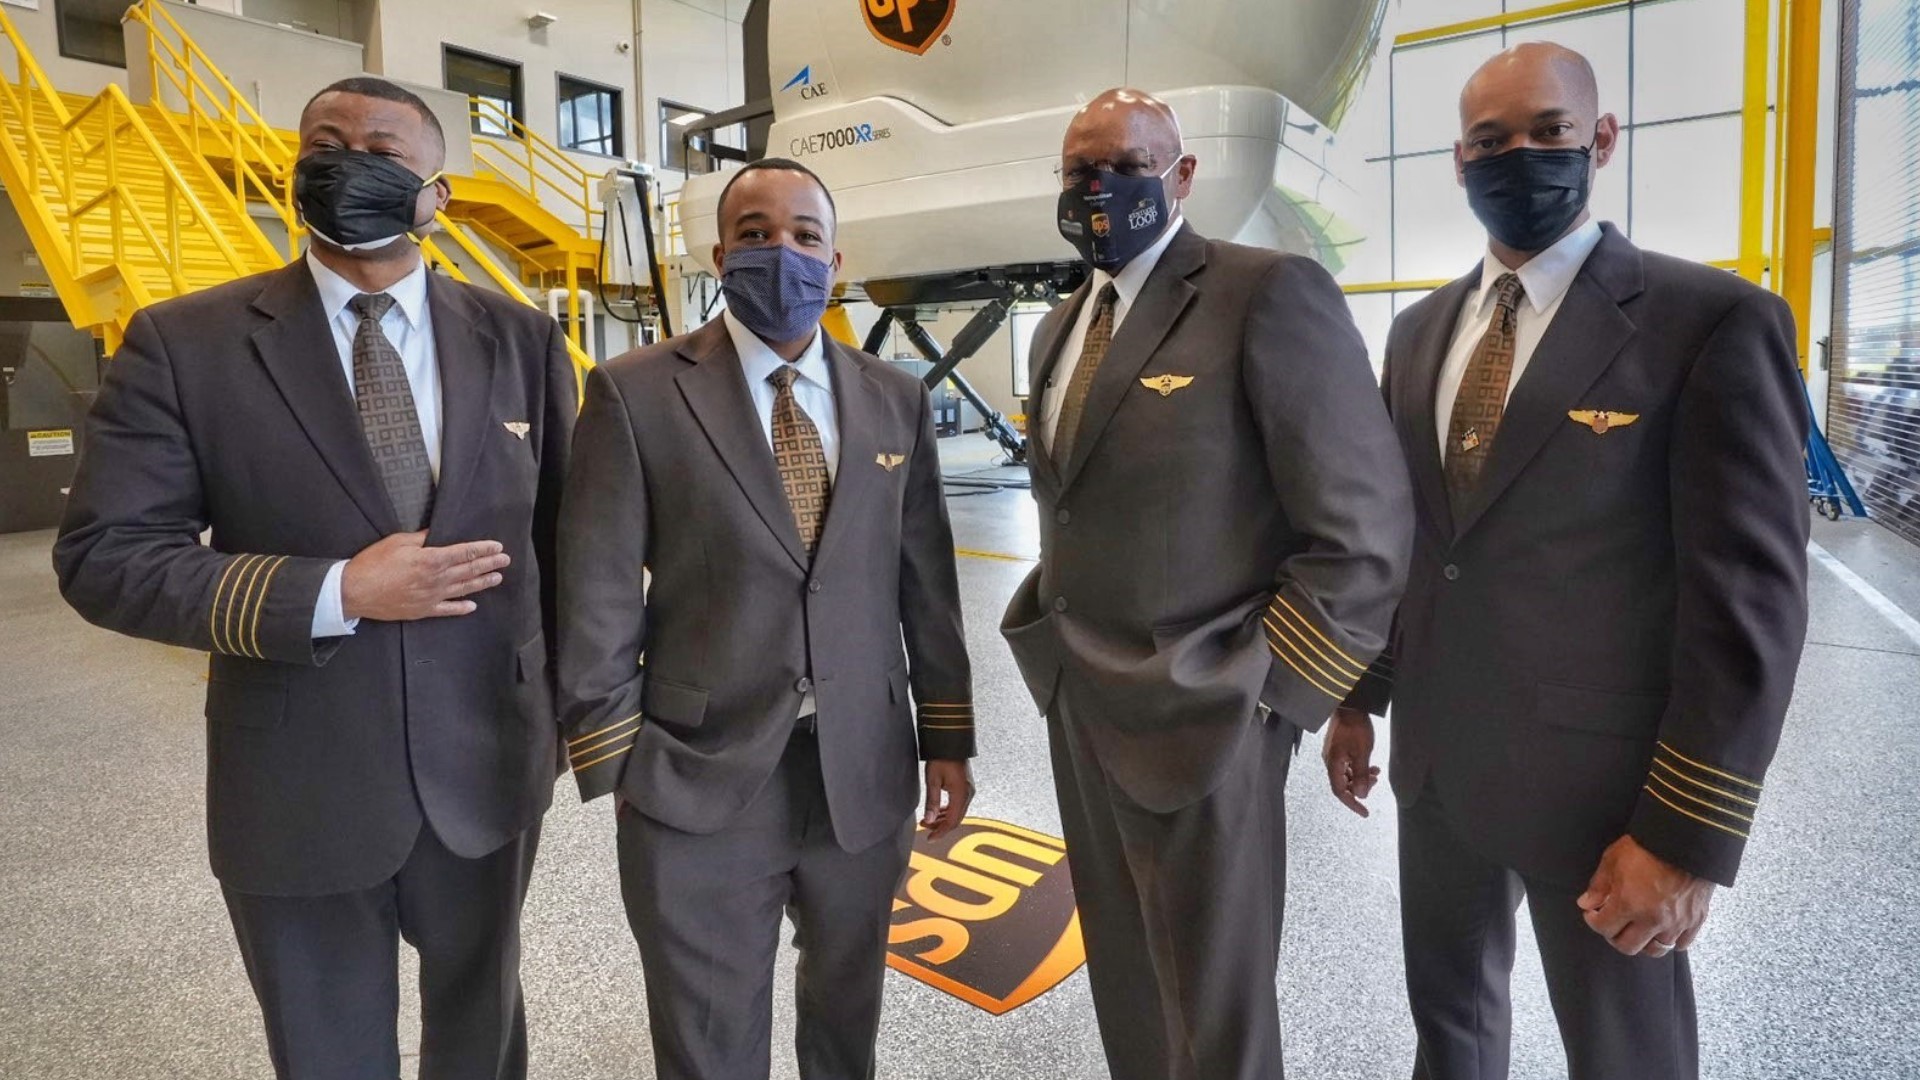 UPS Airlines will fly an all-Black crew during Thunder Over Louisville, for the first time in the air show’s history.